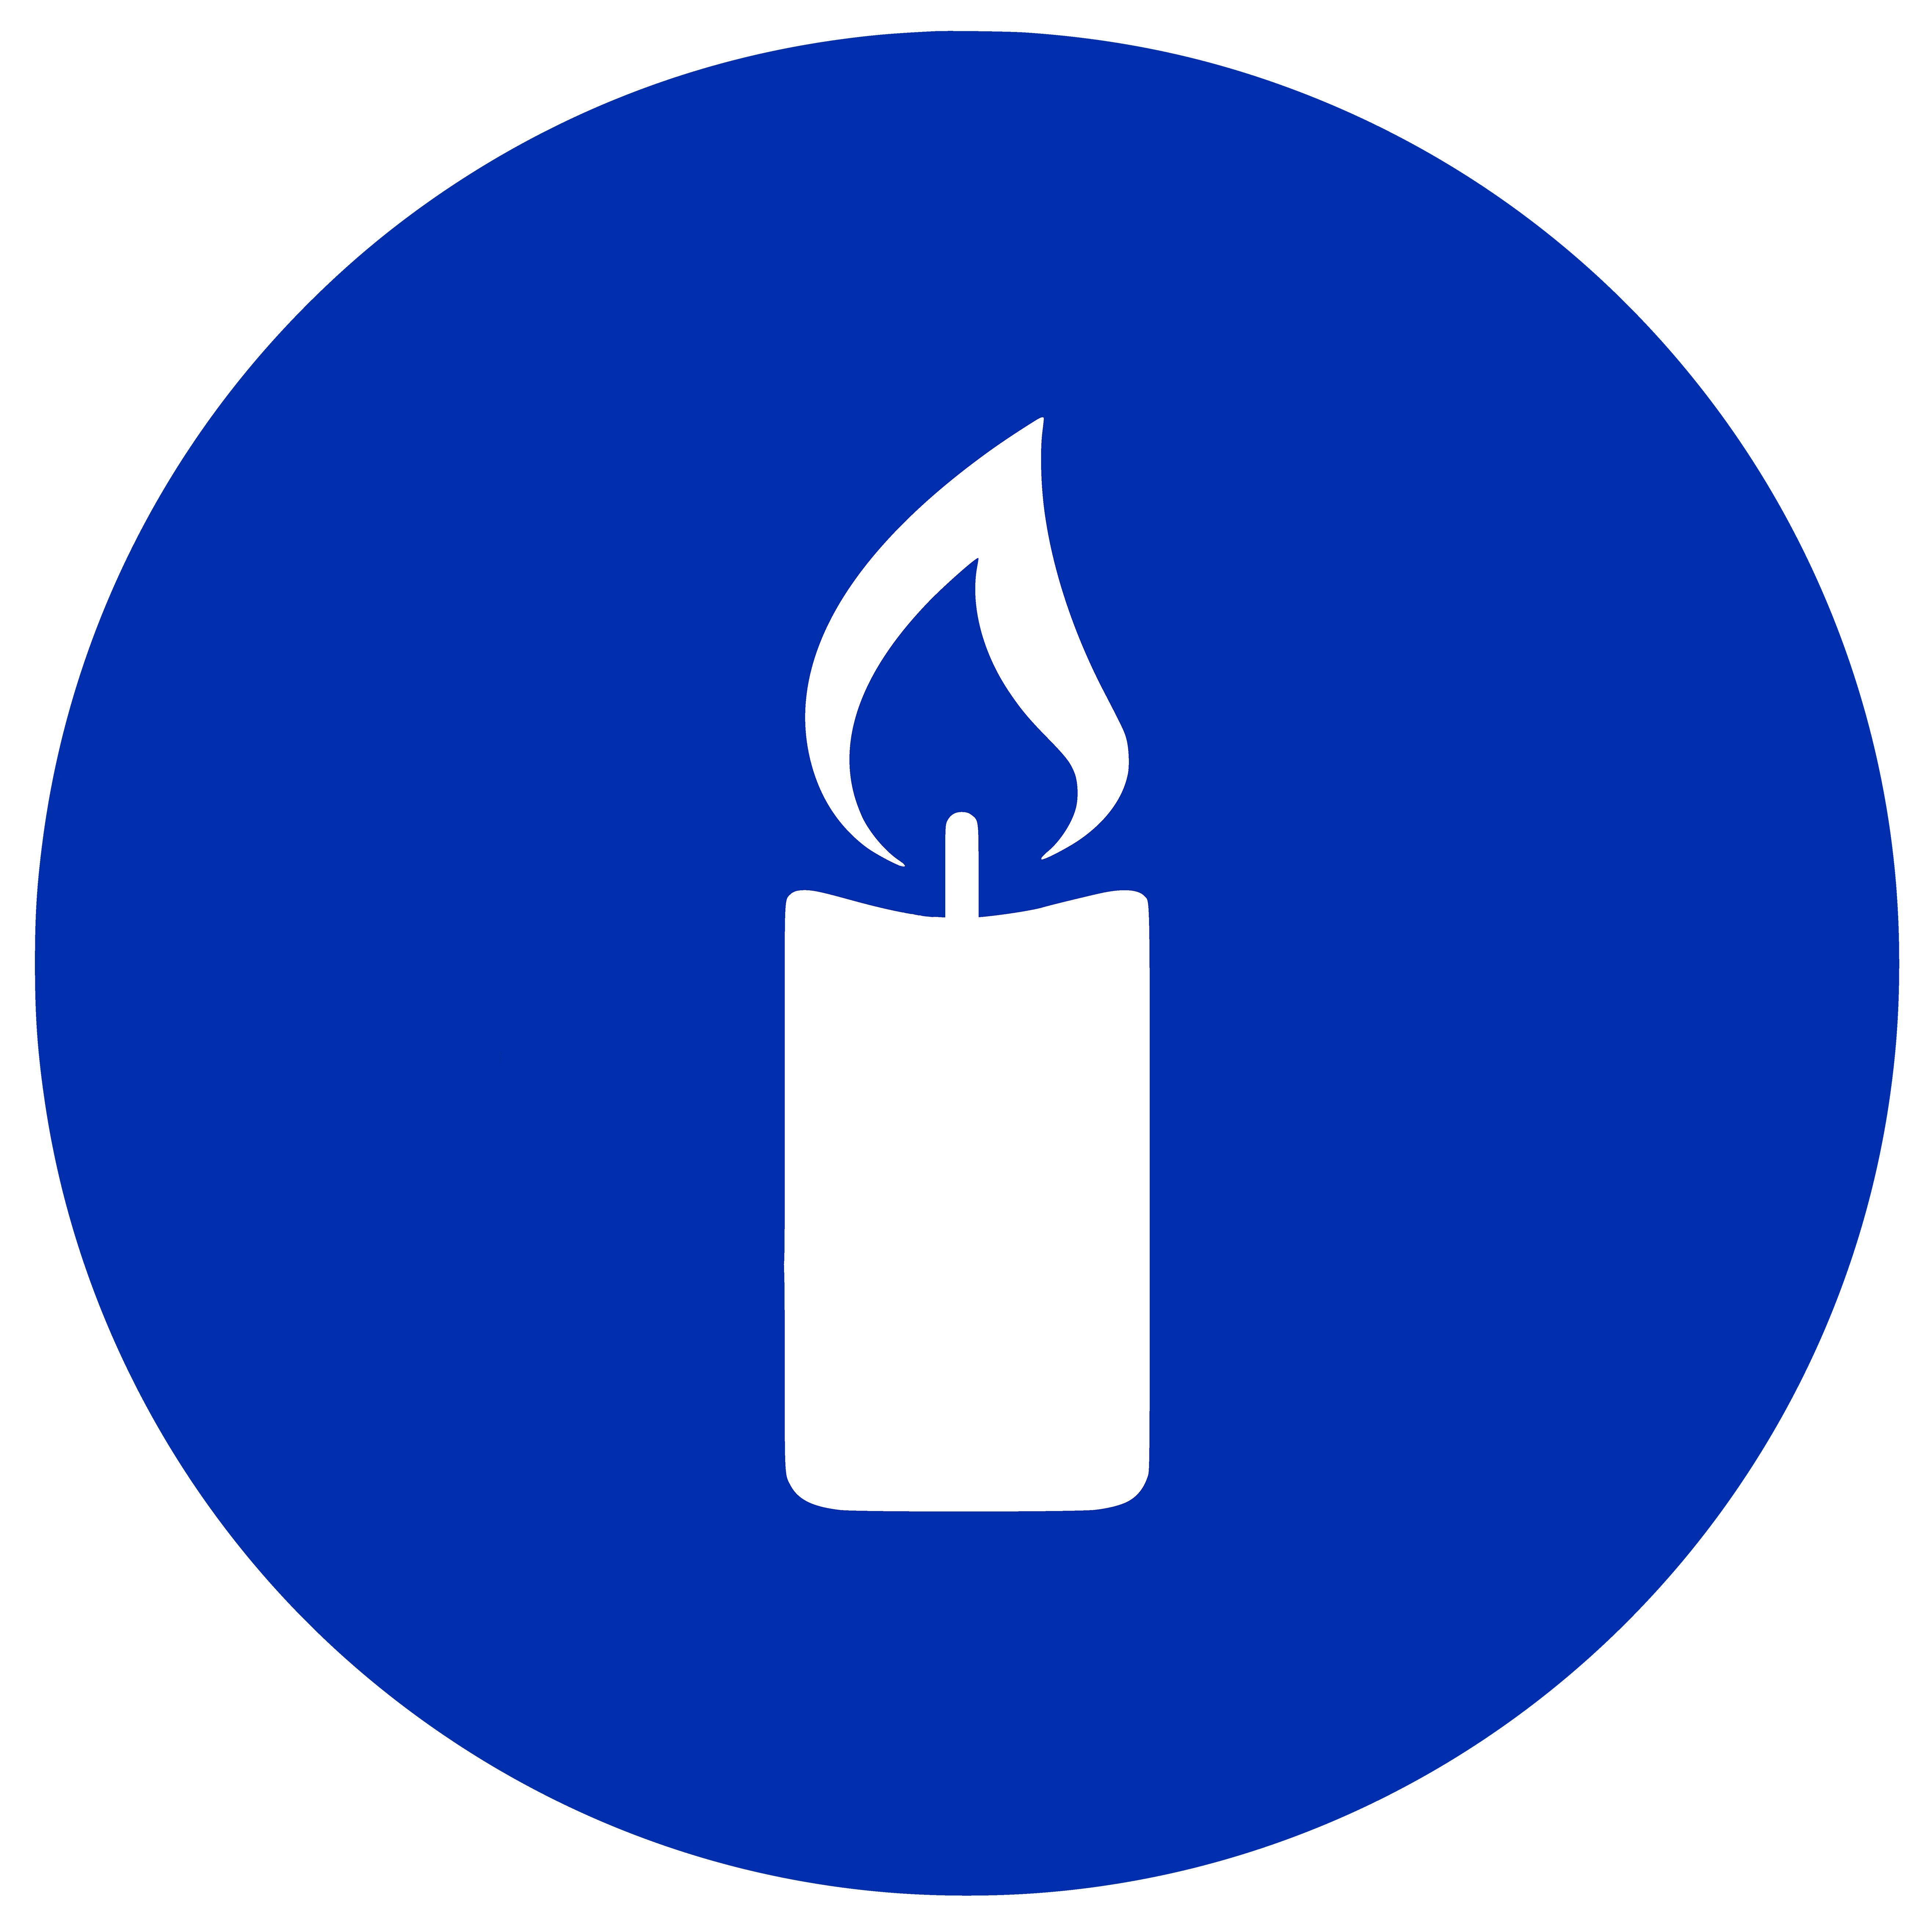 (CNDL) Candle to LBP